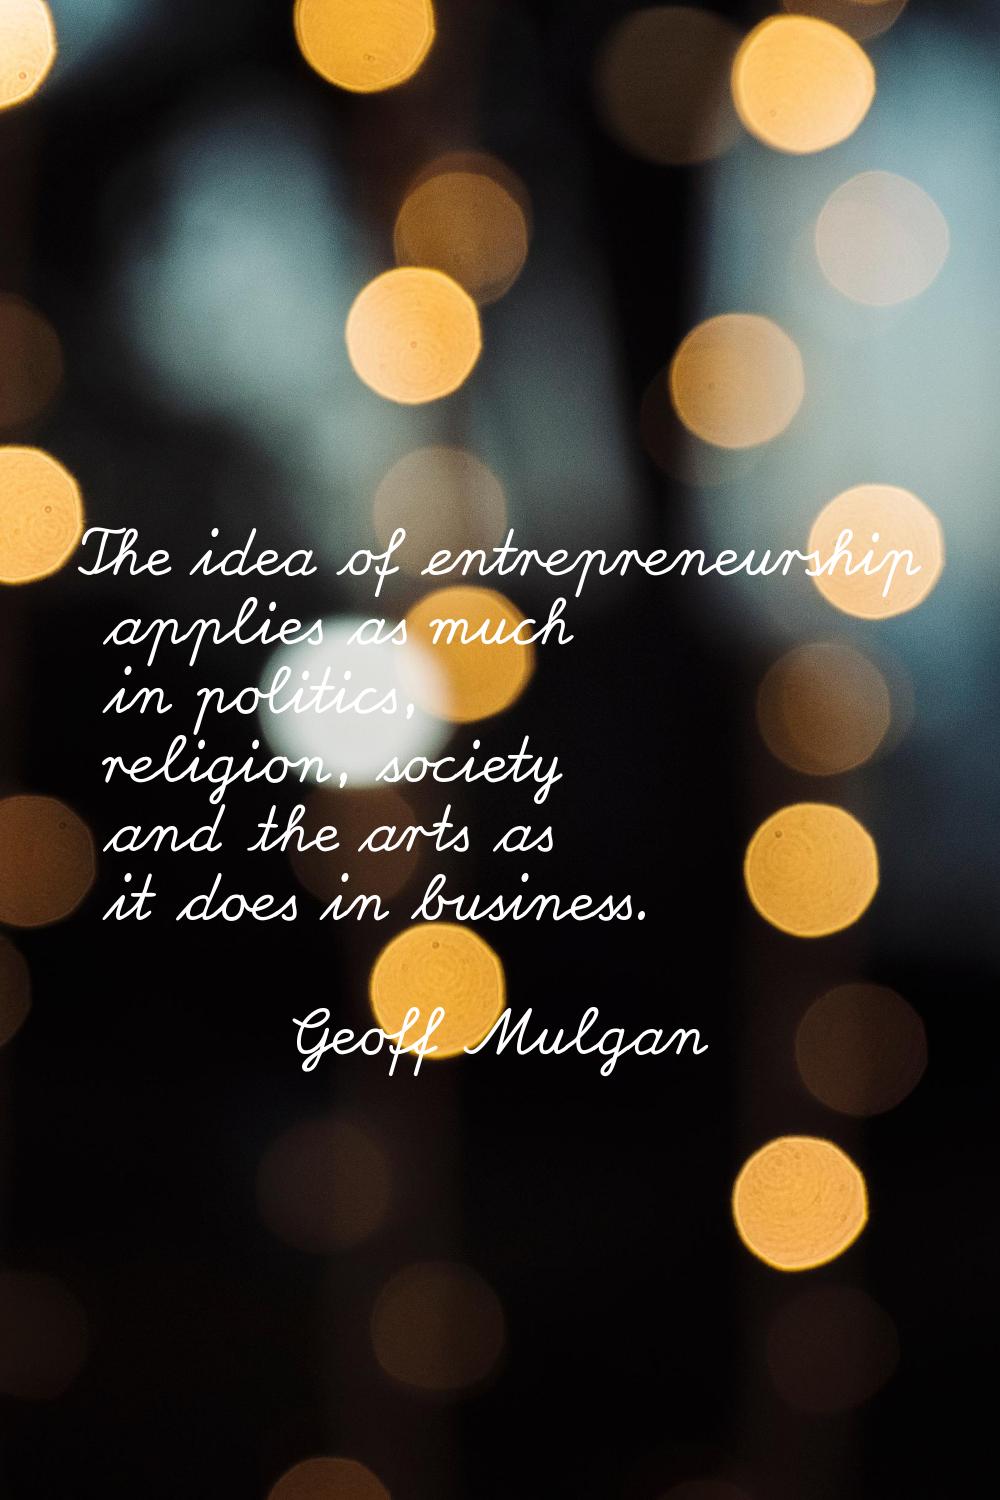 The idea of entrepreneurship applies as much in politics, religion, society and the arts as it does